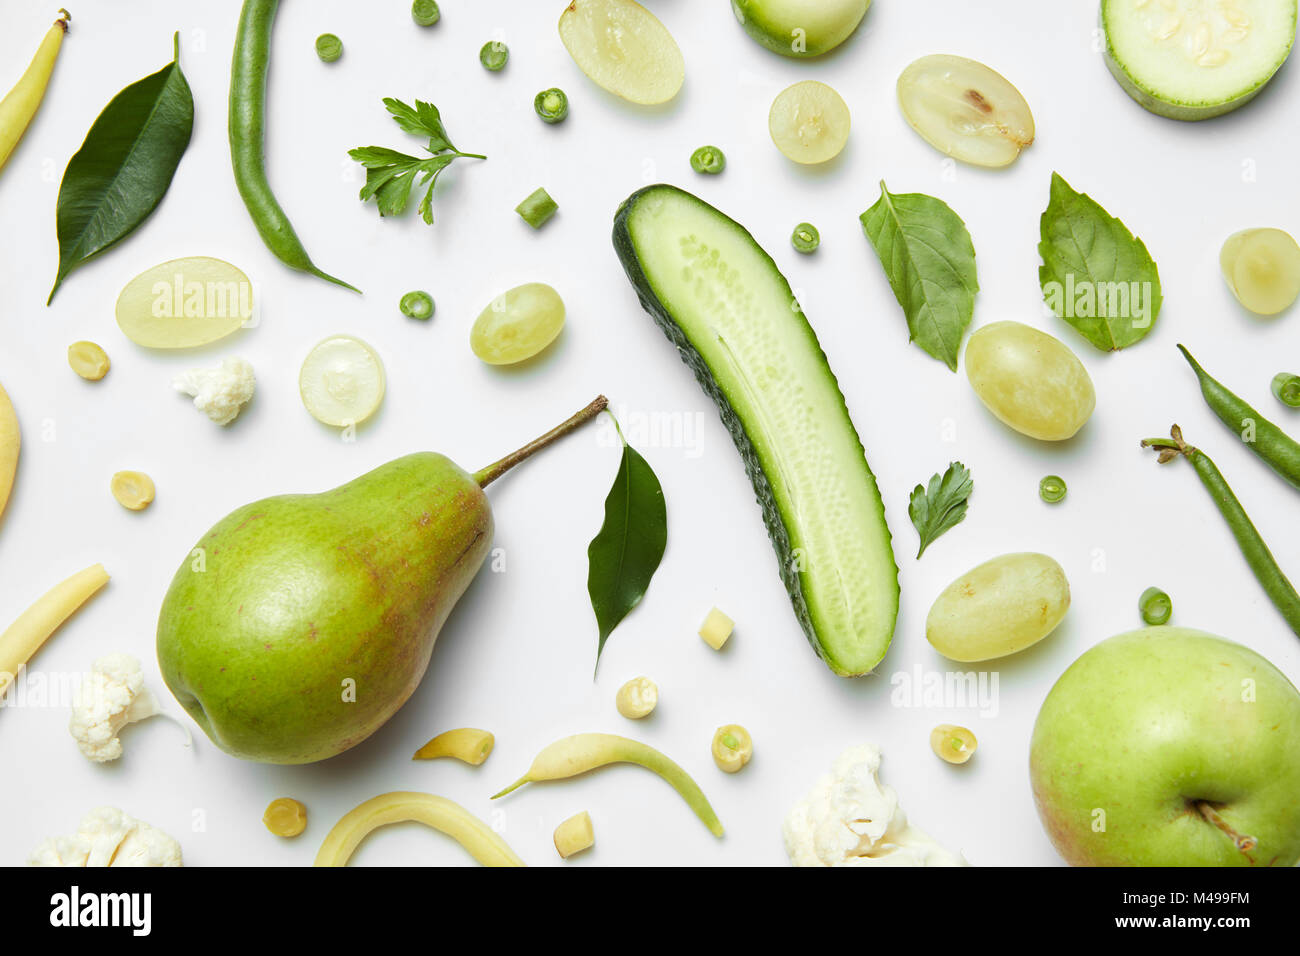 Composition with fresh vegetables and fruits on a white background Stock Photo